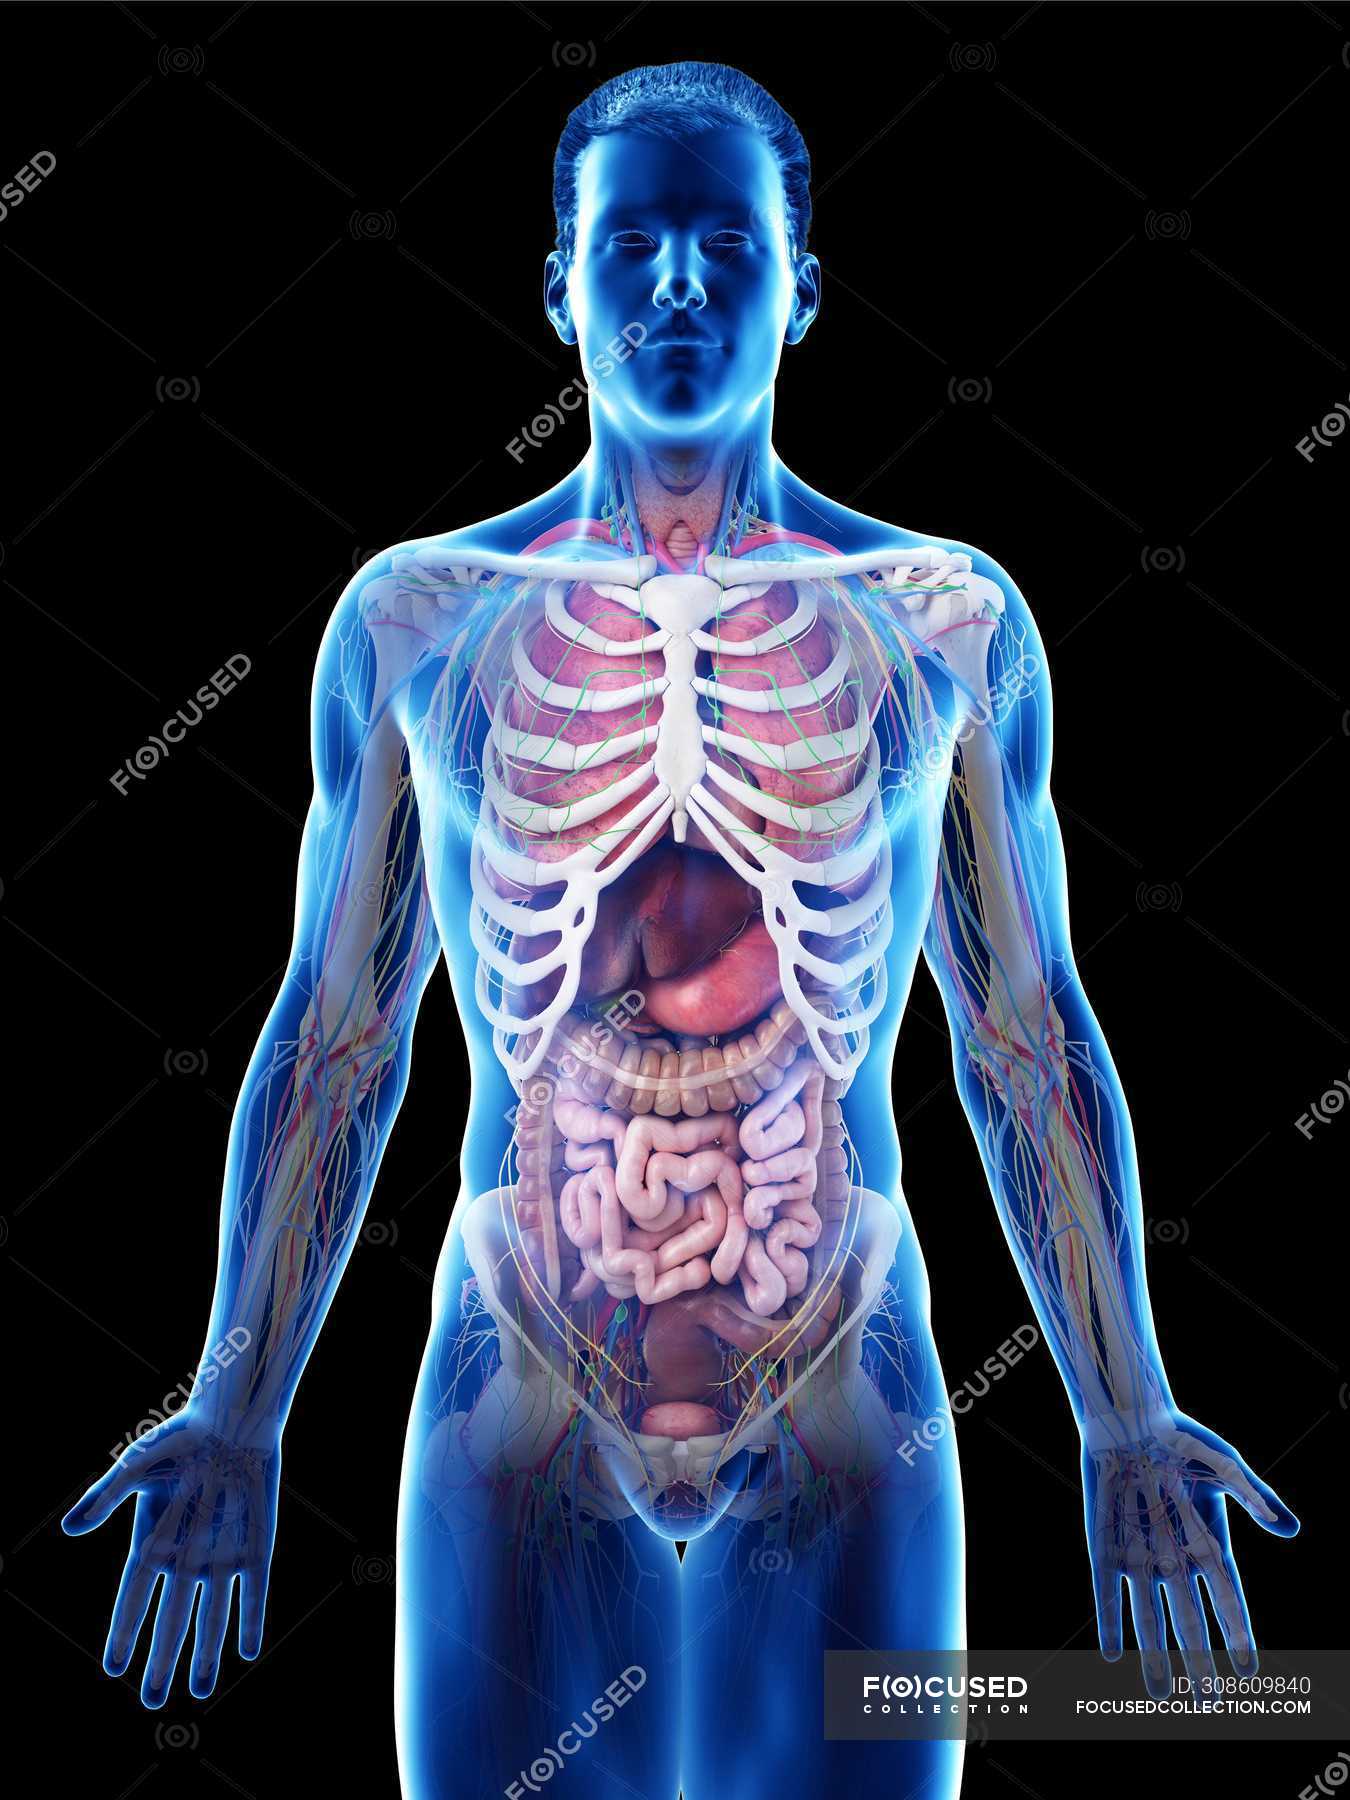 Male Internal Organs Of Human Body Realistic Human Body Model Showing Male Anatomy With